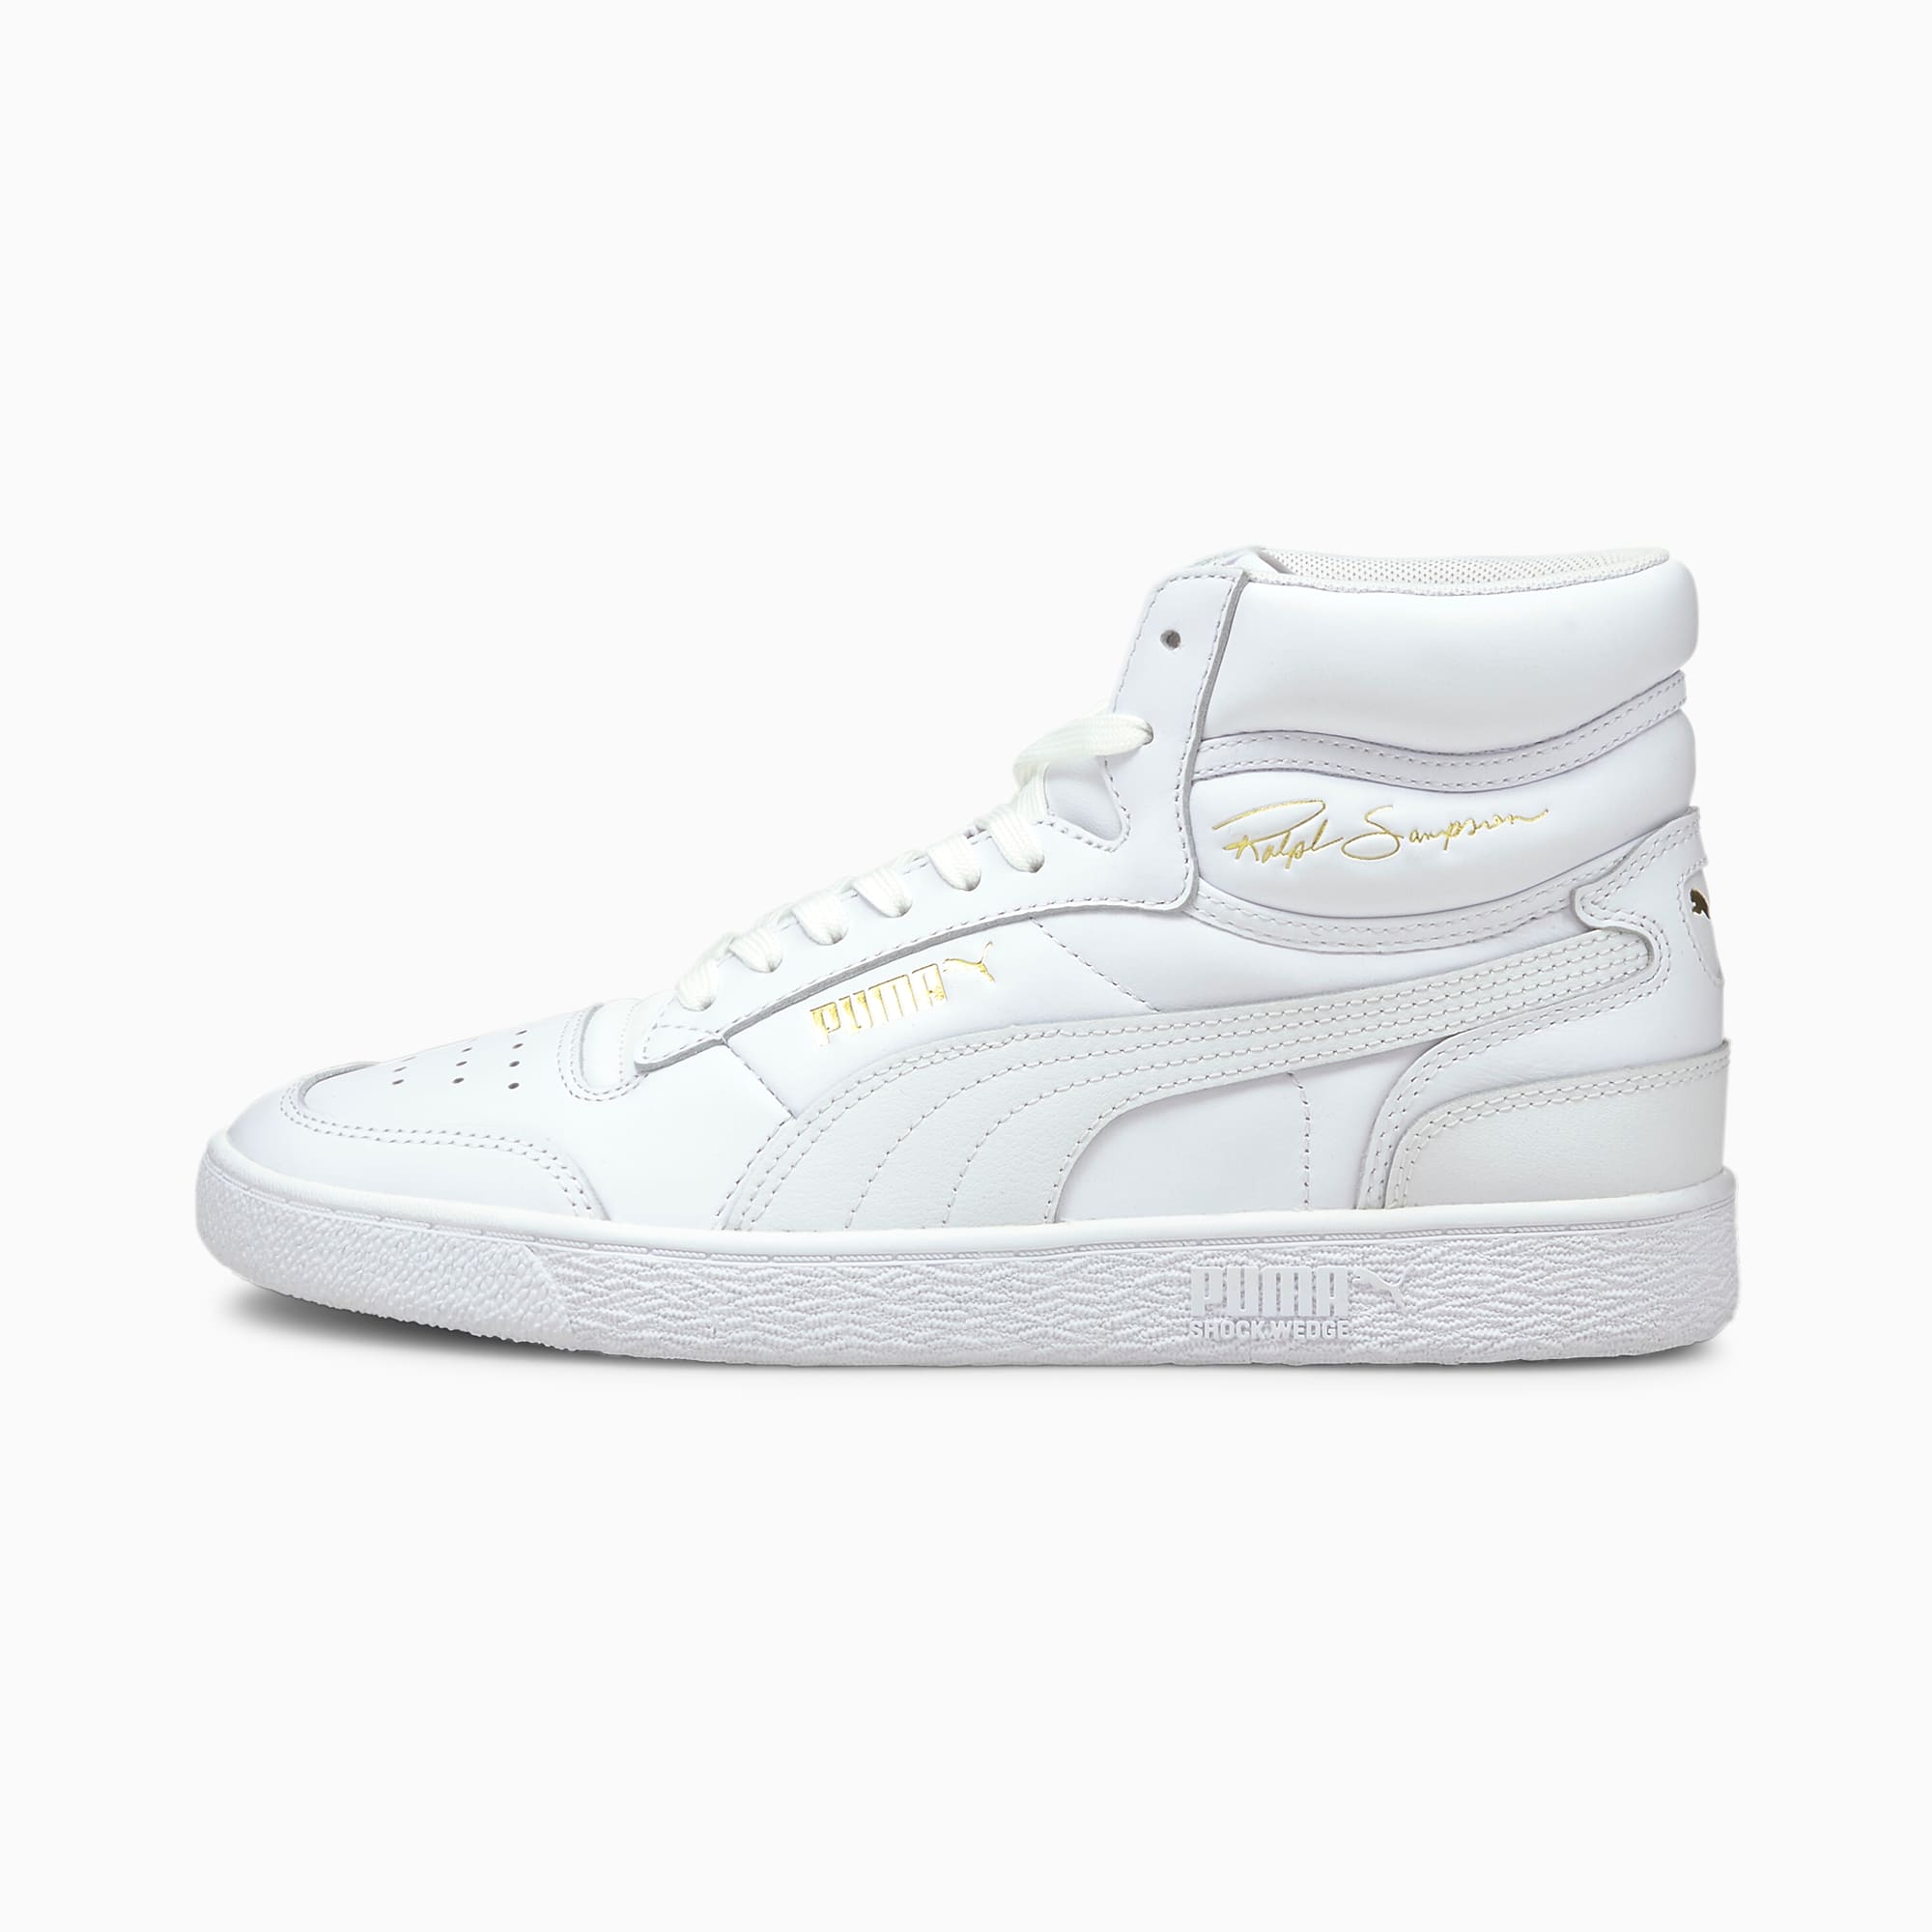 Chaussure Basket PUMA x Ralph Sampson Mid, Blanc/Or, Taille 38, Chaussures